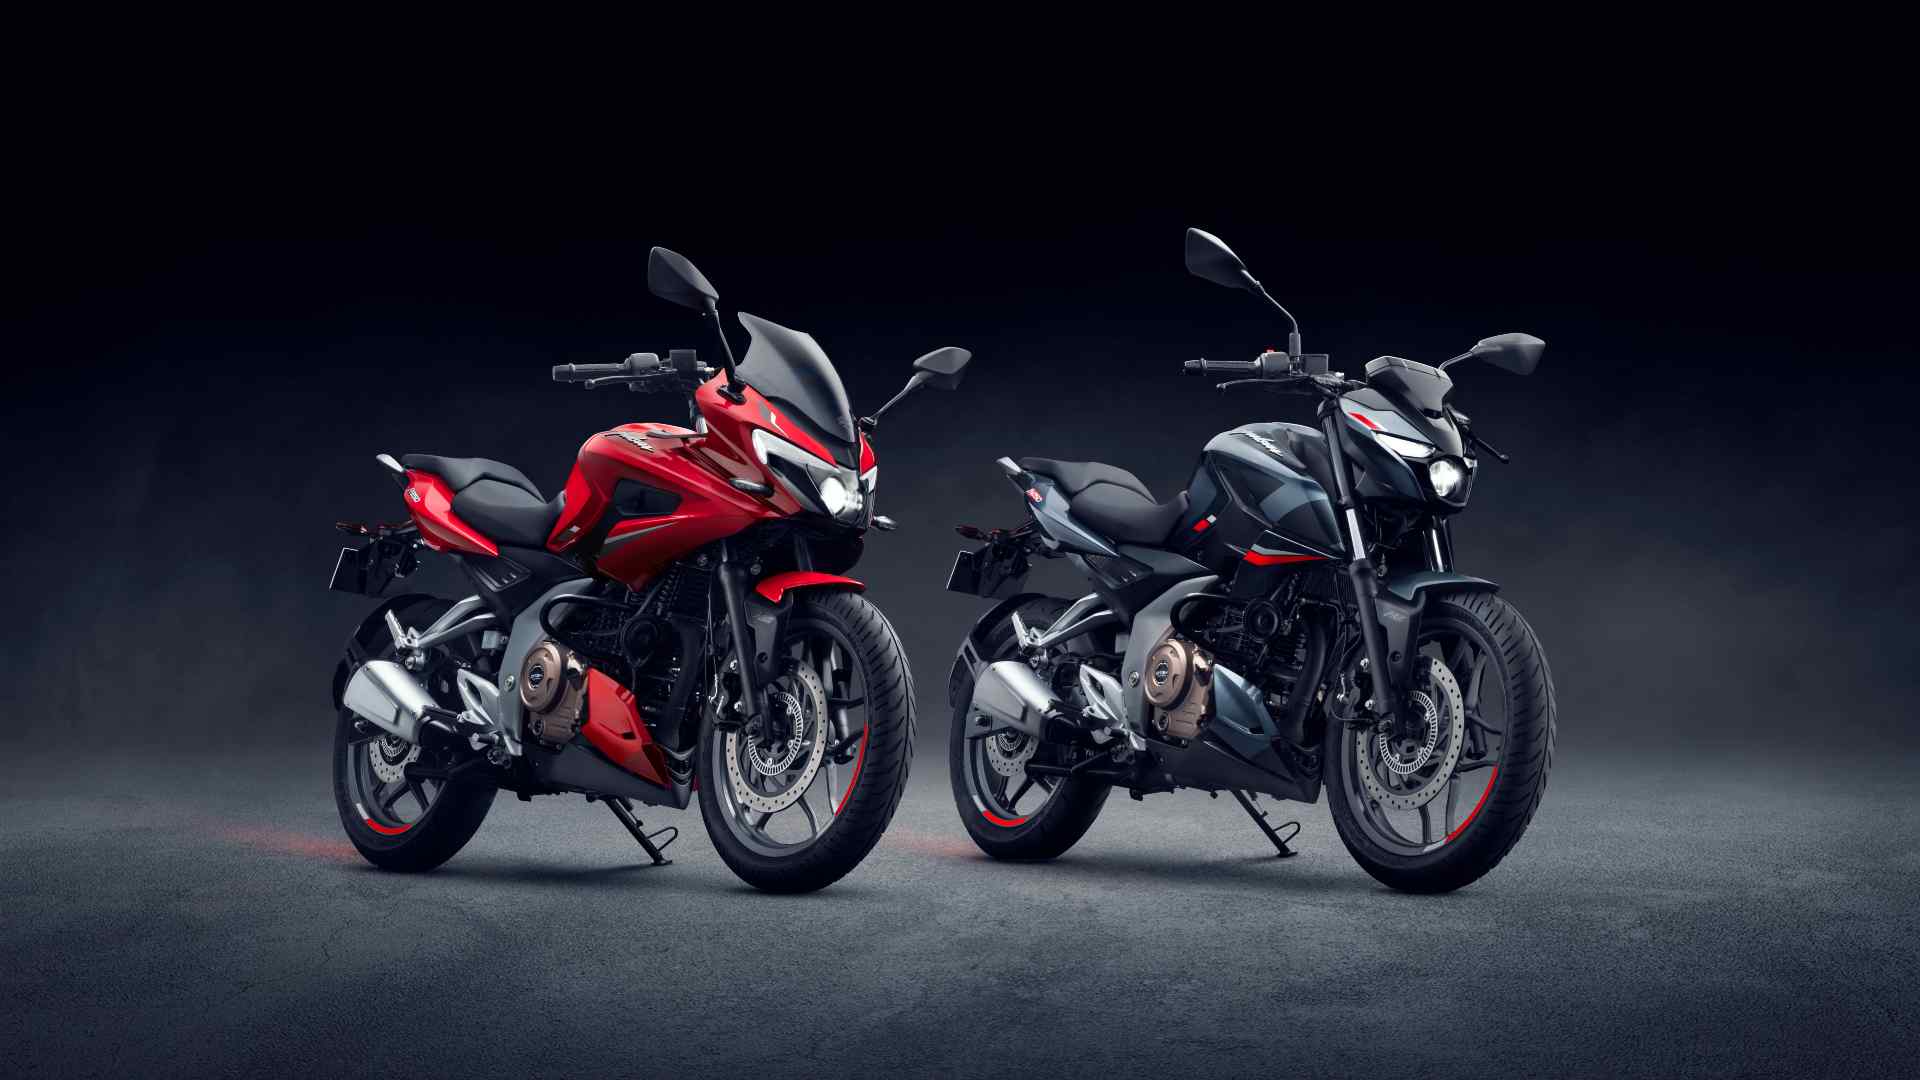 Bajaj Pulsar 250 India launch highlights: Pulsar F250 and N250 revealed,  priced from Rs  lakh- Technology News, Firstpost